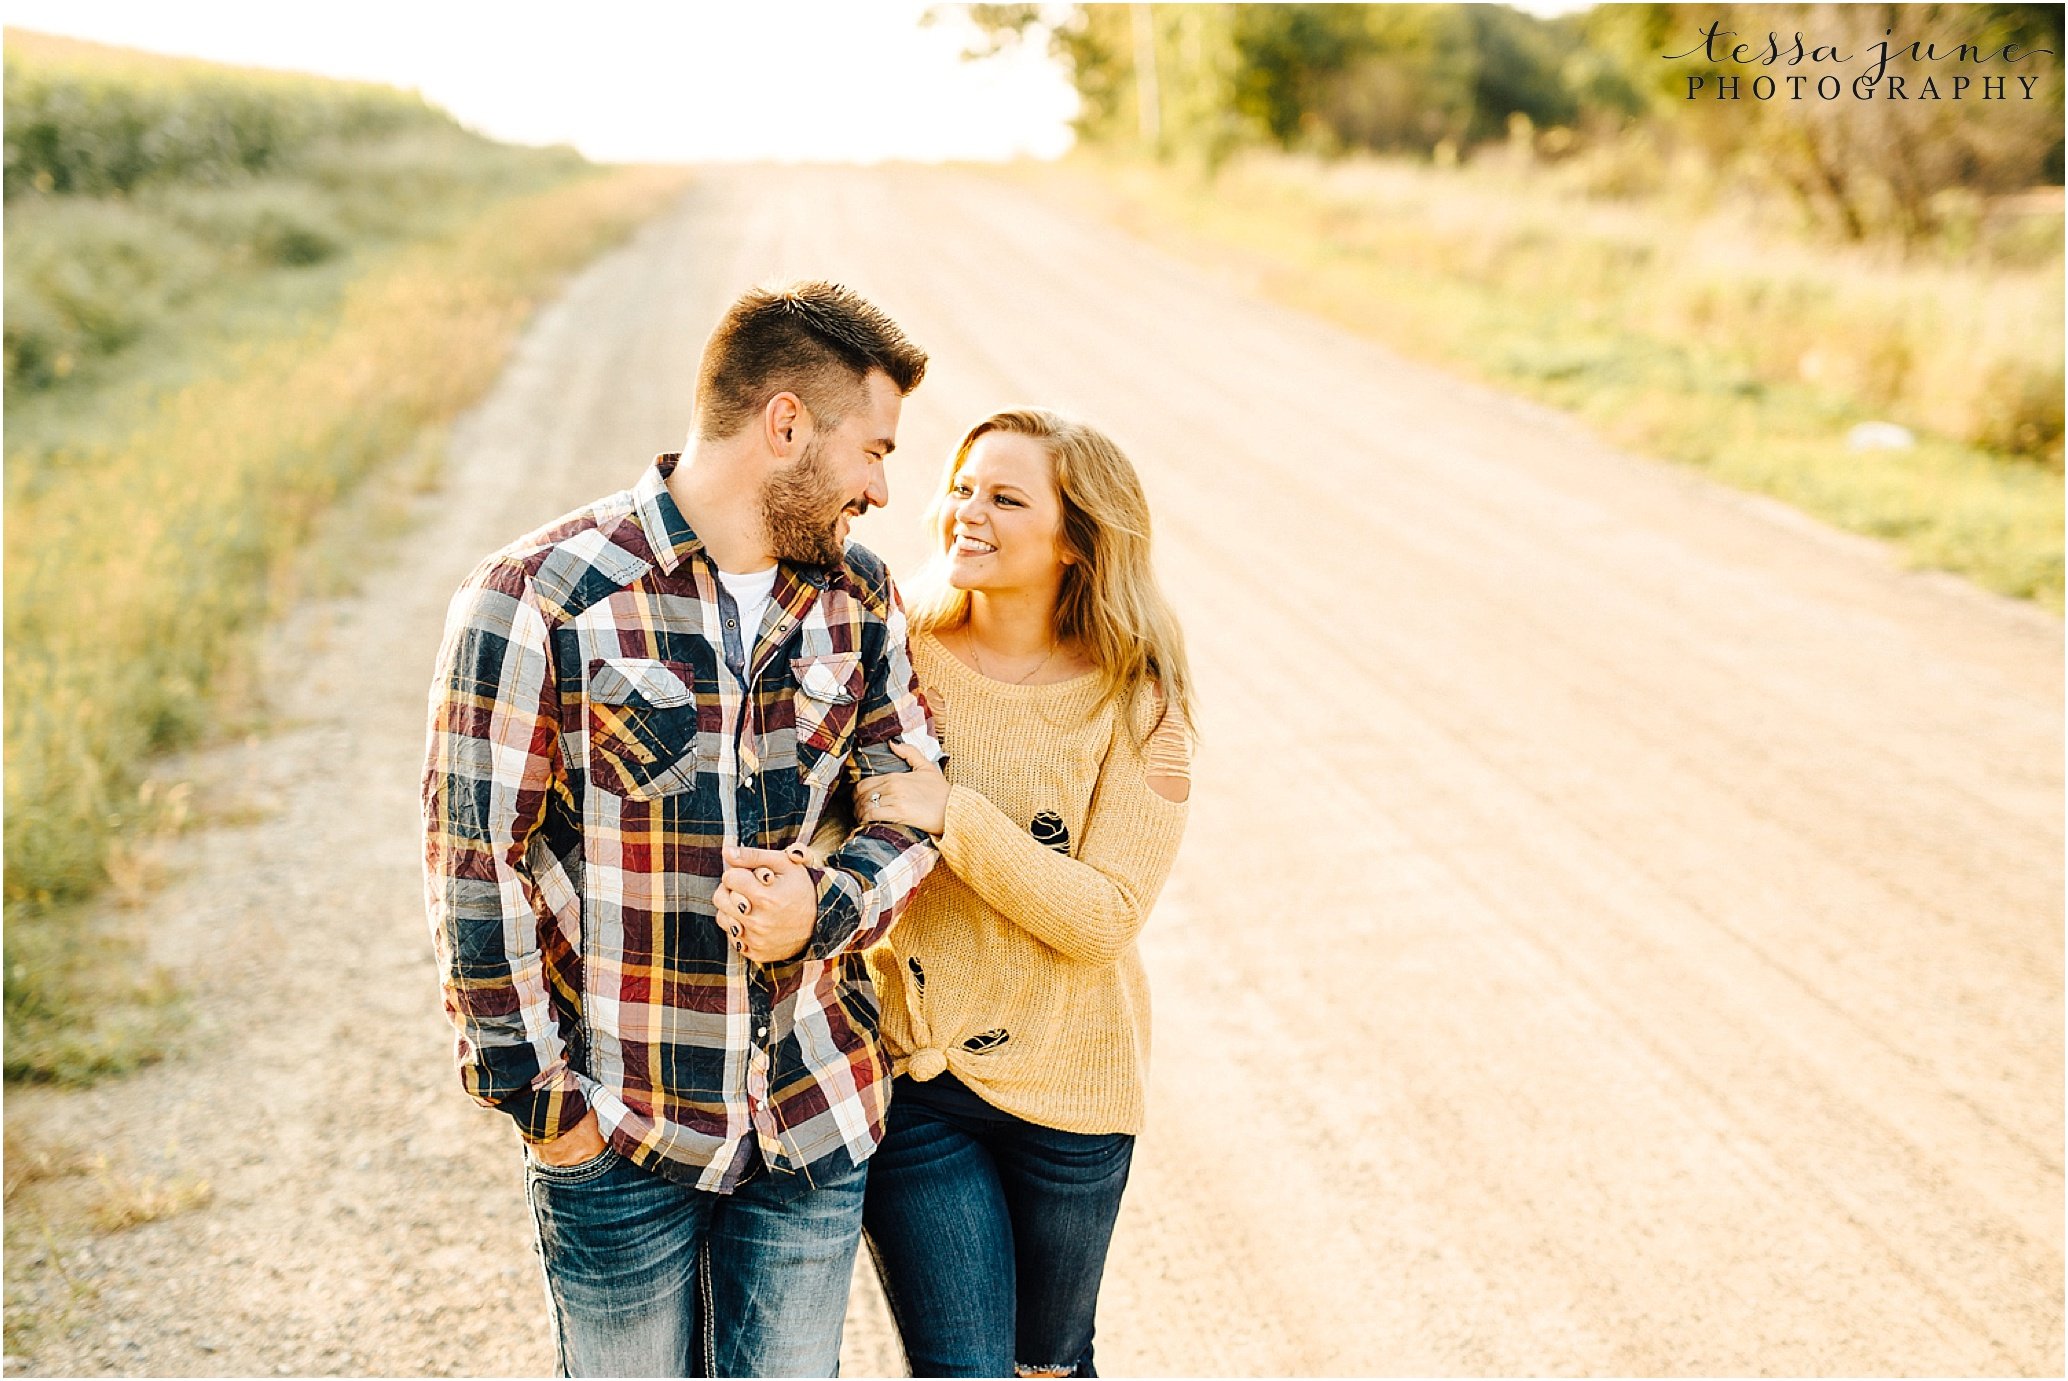 st-cloud-wedding-photographer-engagement-session-with-old-truck-21.jpeg